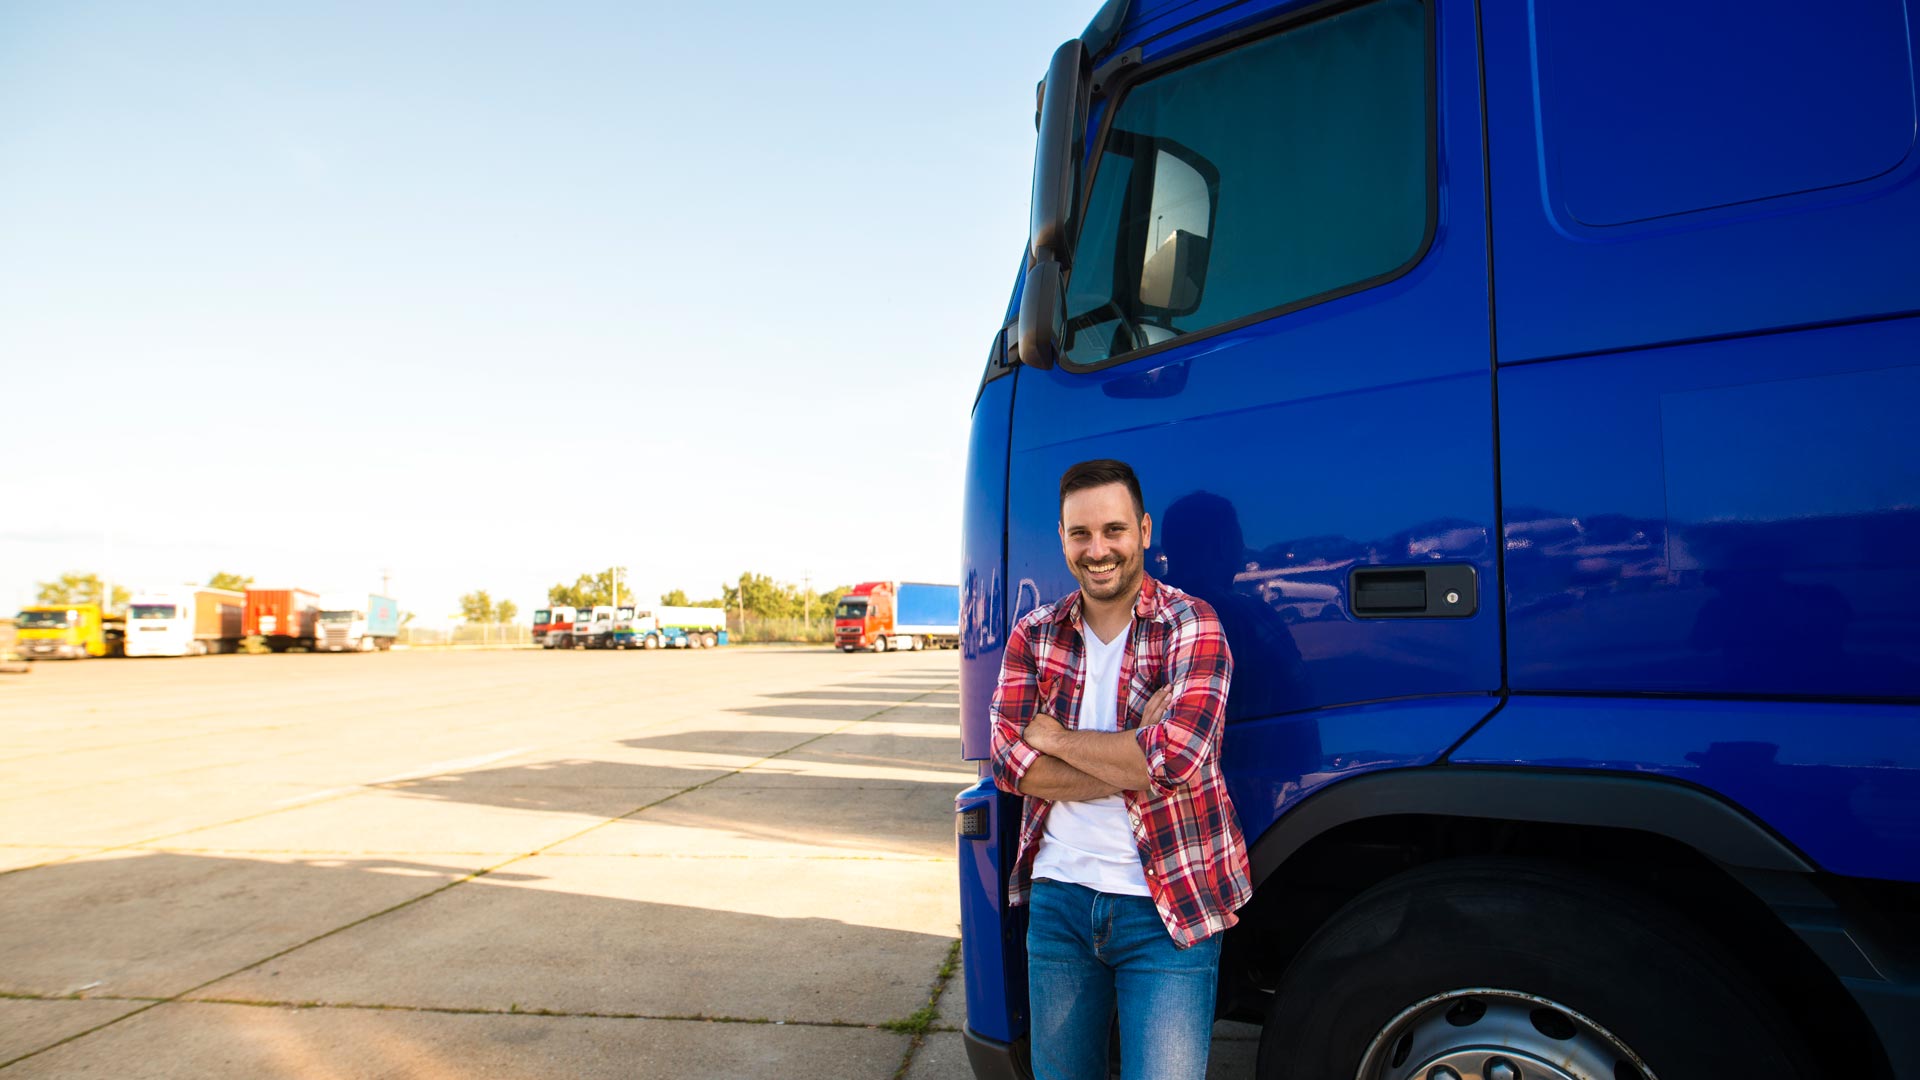 Benefits-Of-Using-Trucking-Permit-Services-And-How-To-Get-Them-On-LightRoom